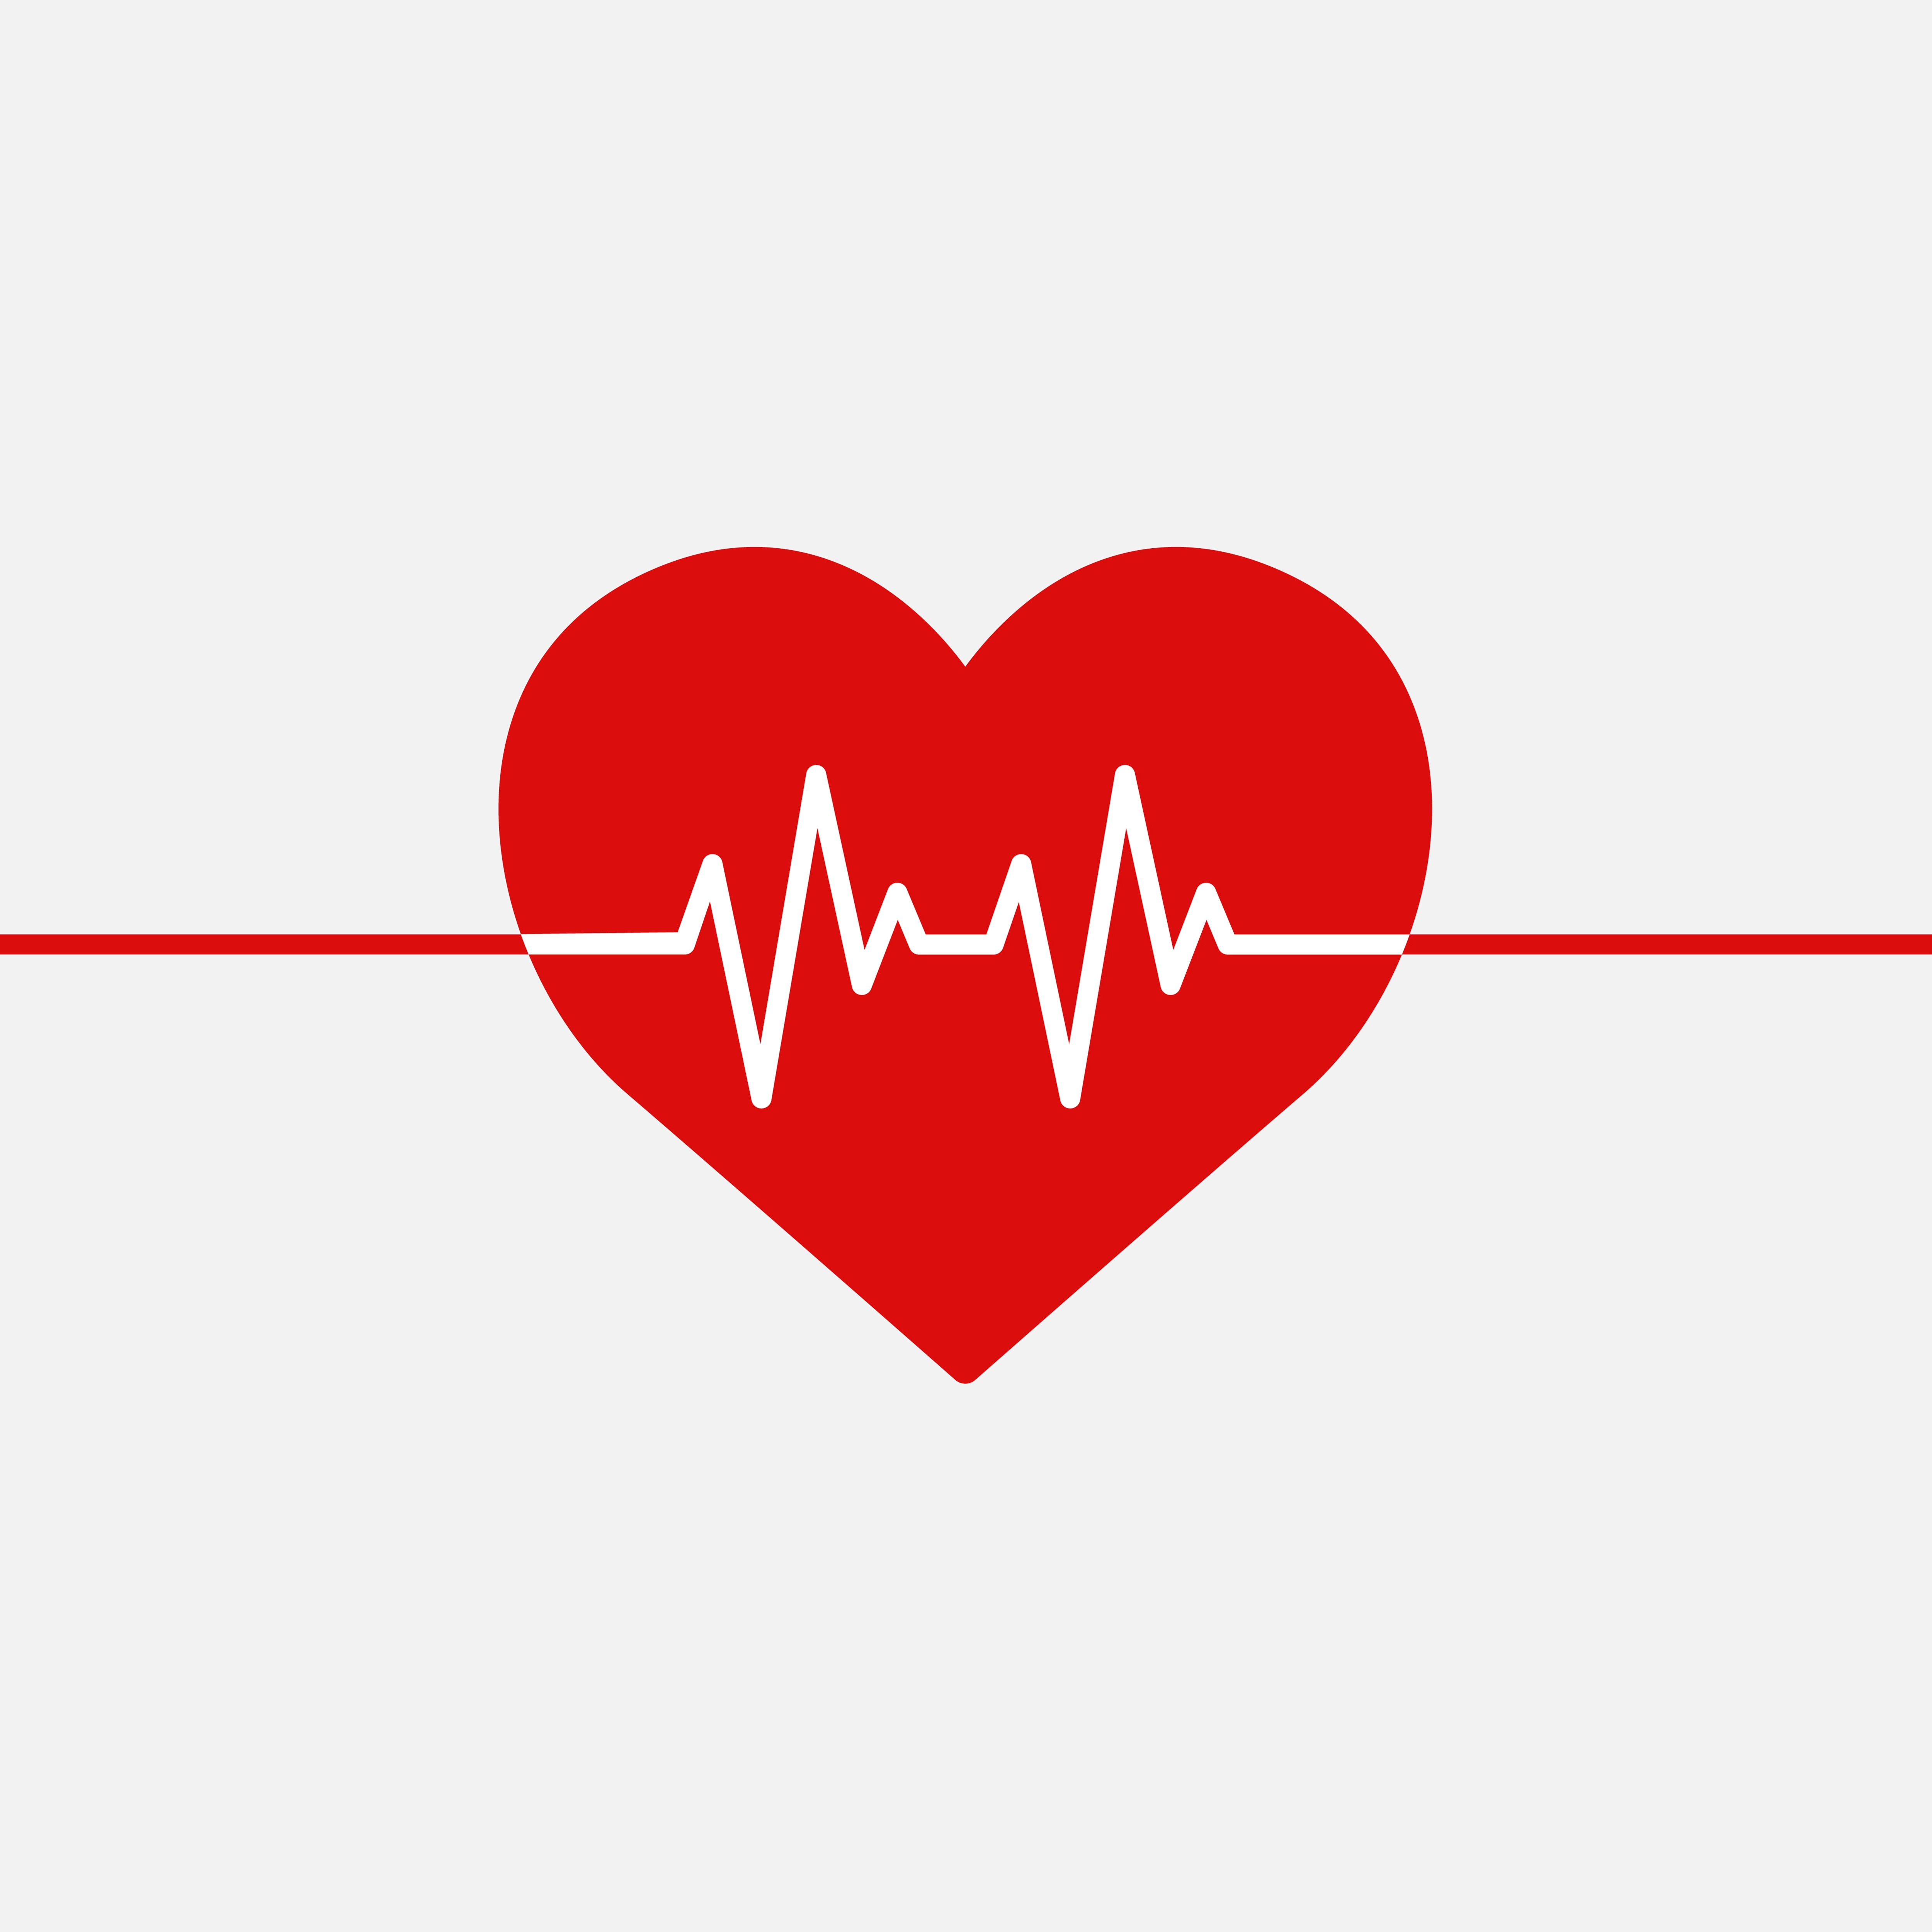 <a href="https://www.freepik.com/free-vector/red-medical-heartbeat-line-vector-heart-shape-graphic-health-charity-concept_16262020.htm#query=heart%20beat&position=2&from_view=keyword&track=ais&uuid=c246286d-a668-4749-b1a8-536f4e1aca41">Image by rawpixel.com</a> on Freepik